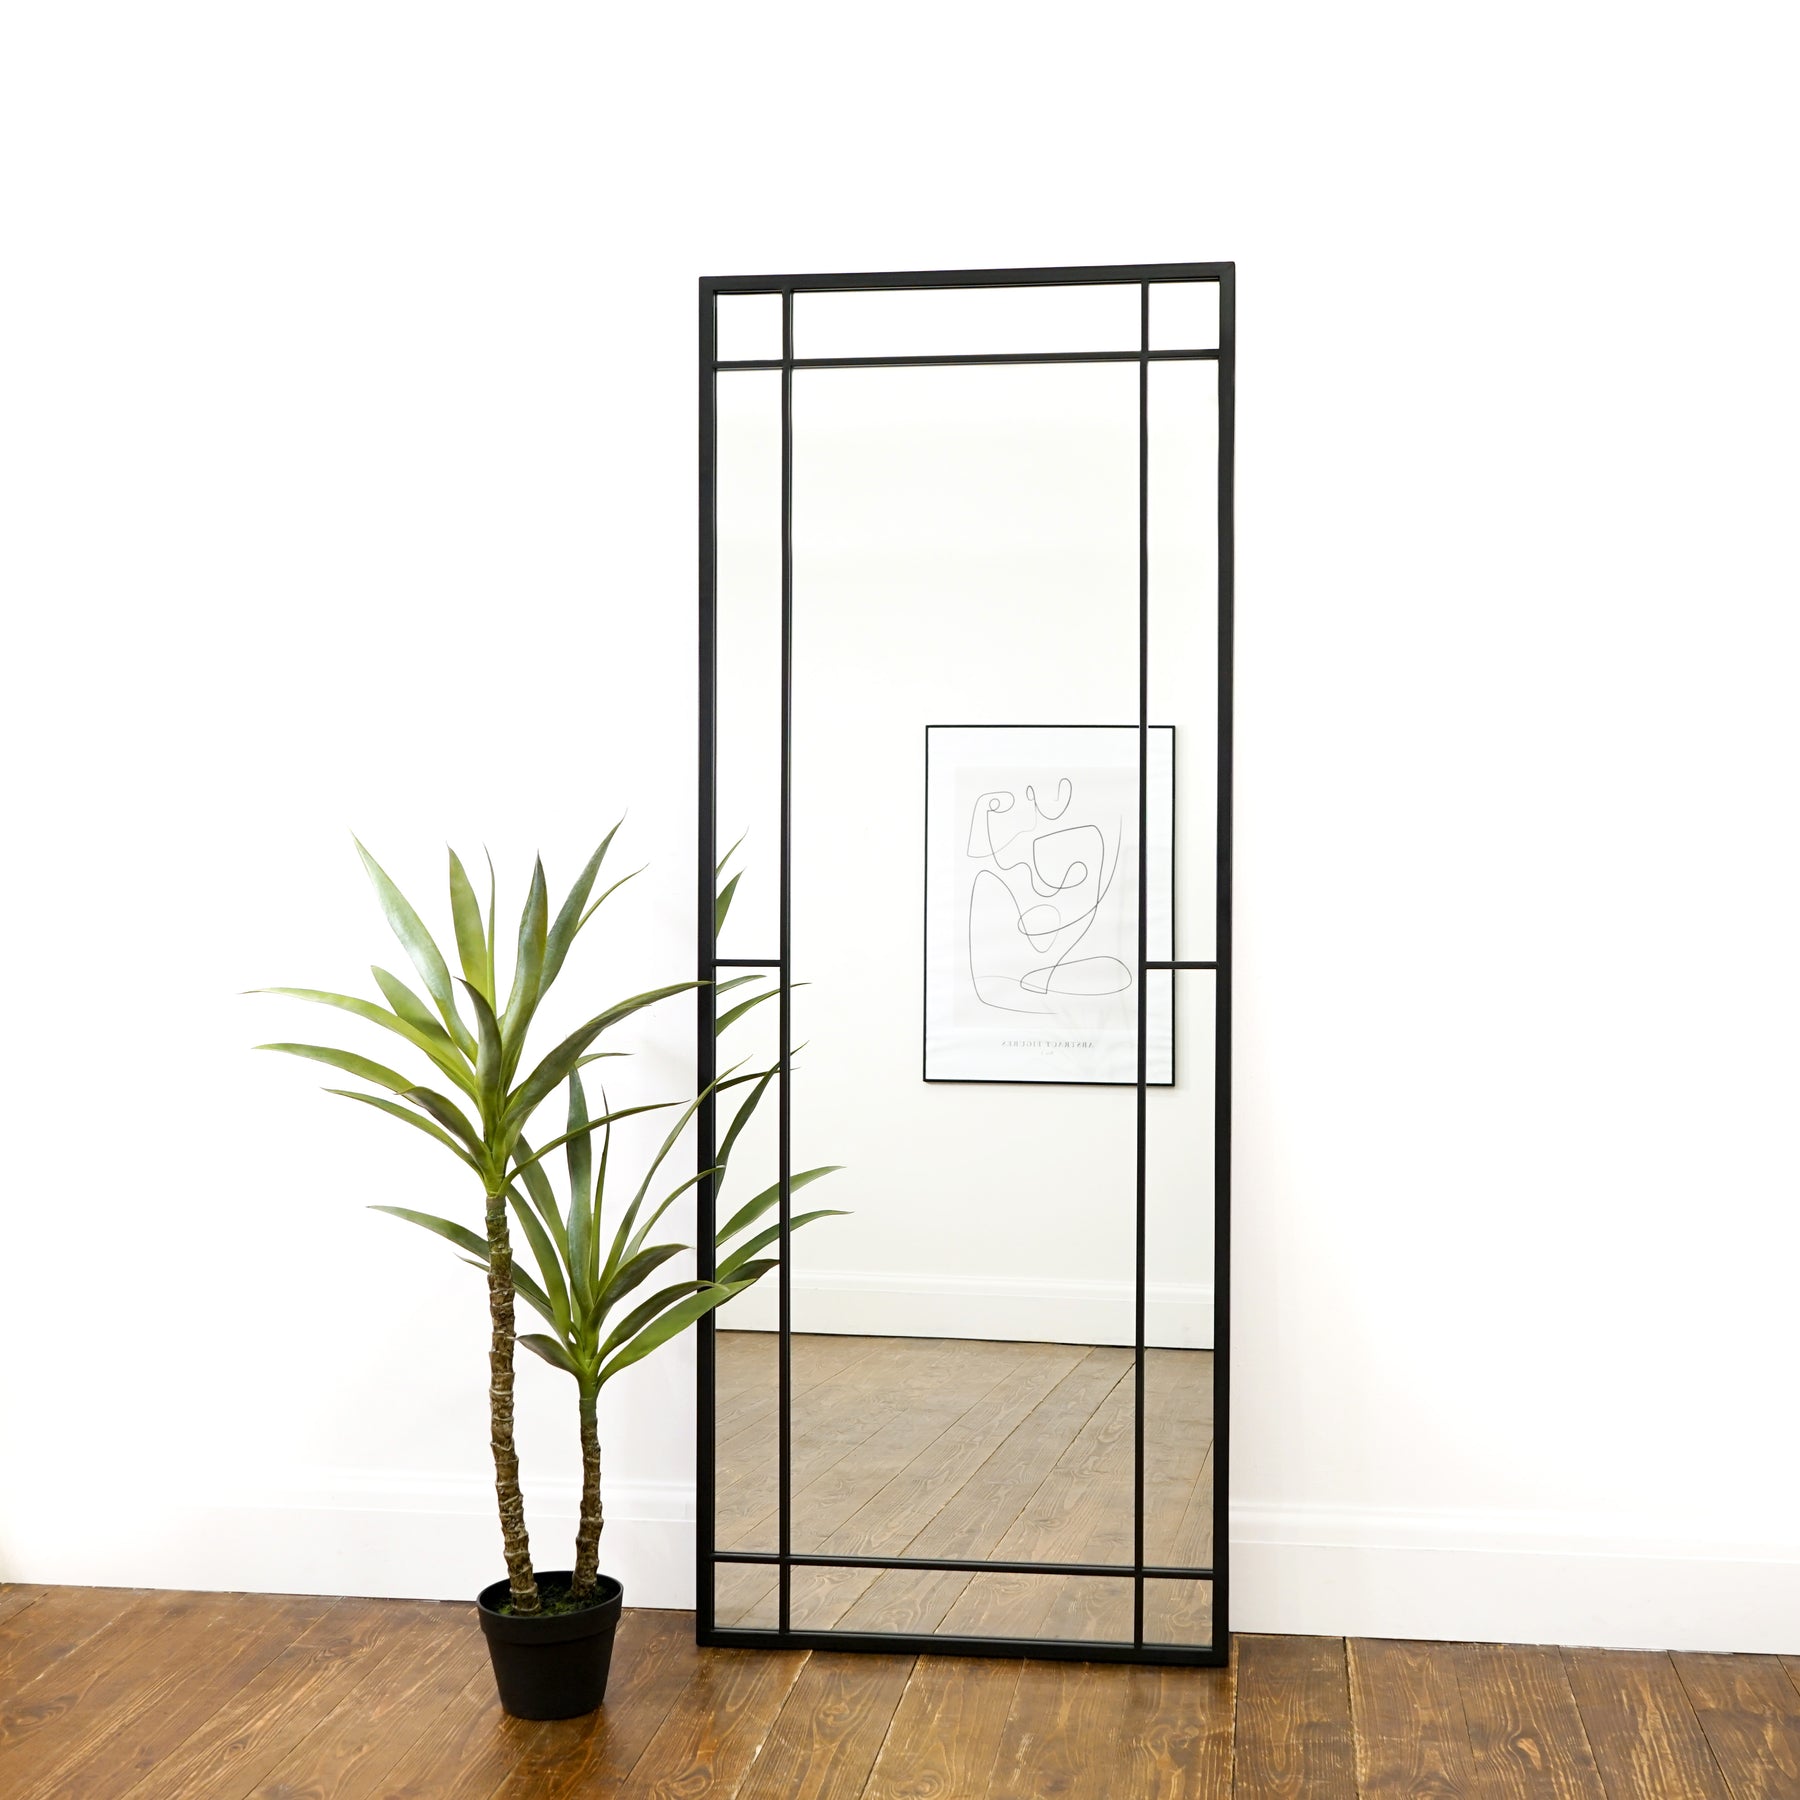 Black industrial full length metal mirror leaning against wall with plant